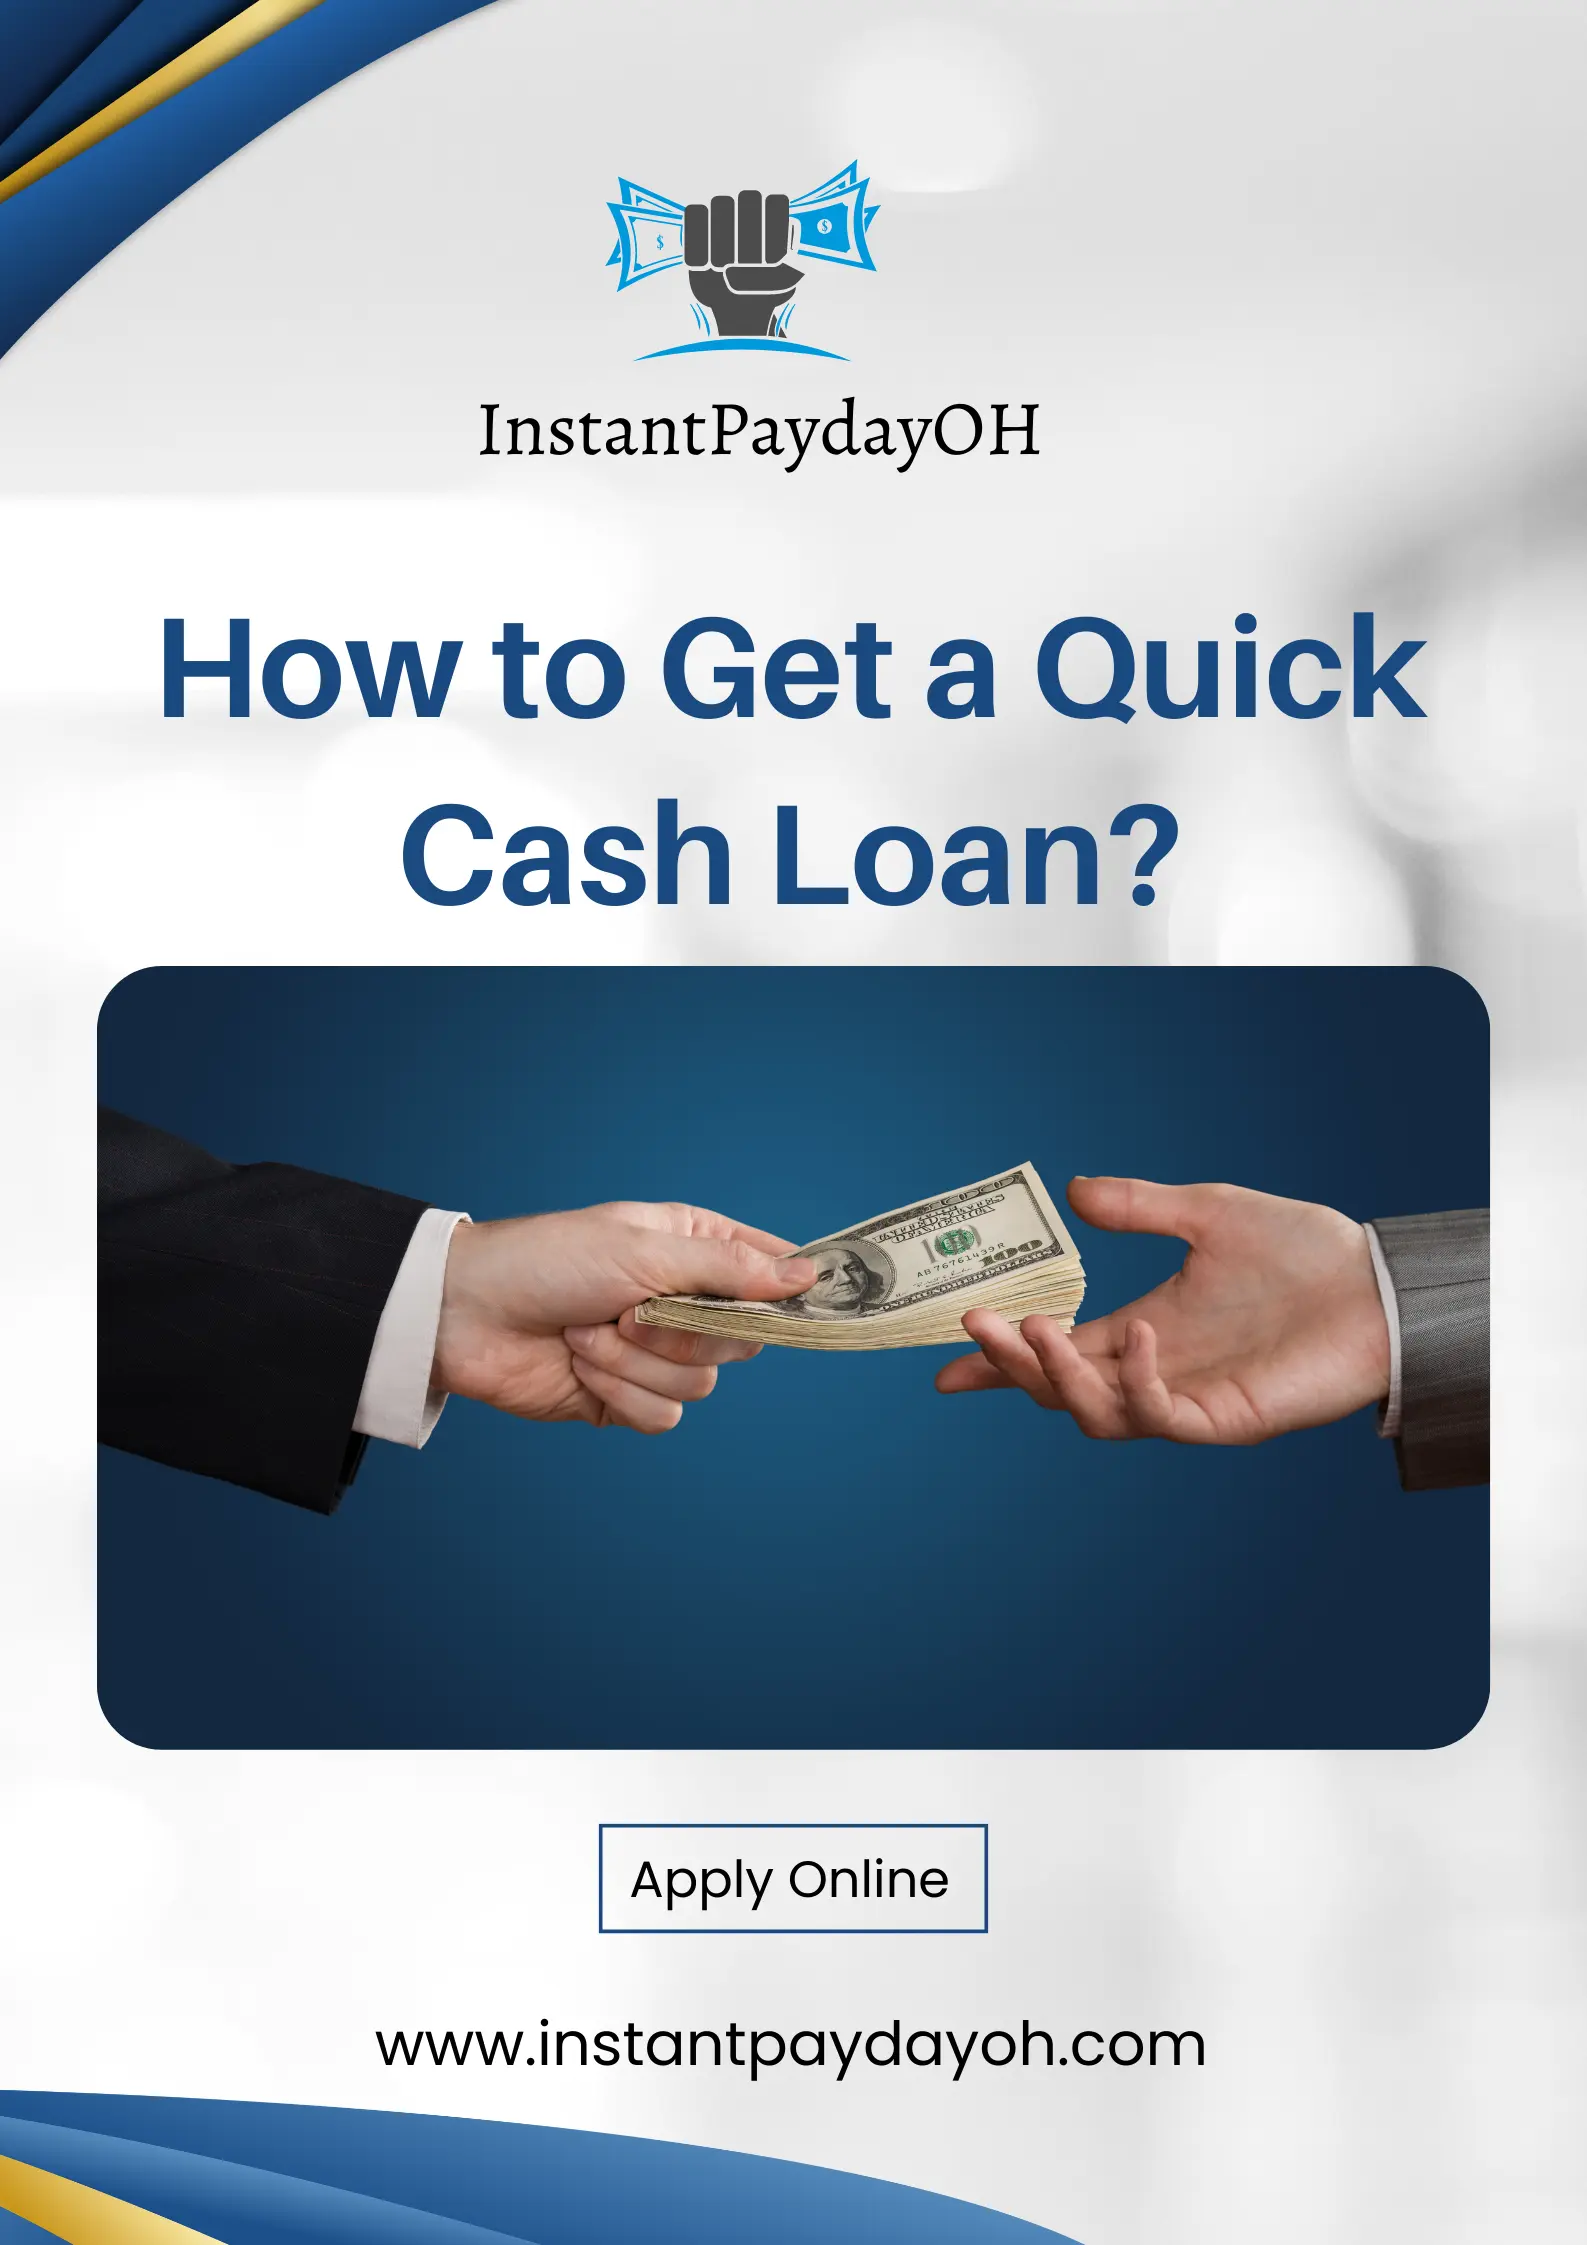 How to Get a Quick Cash Loan